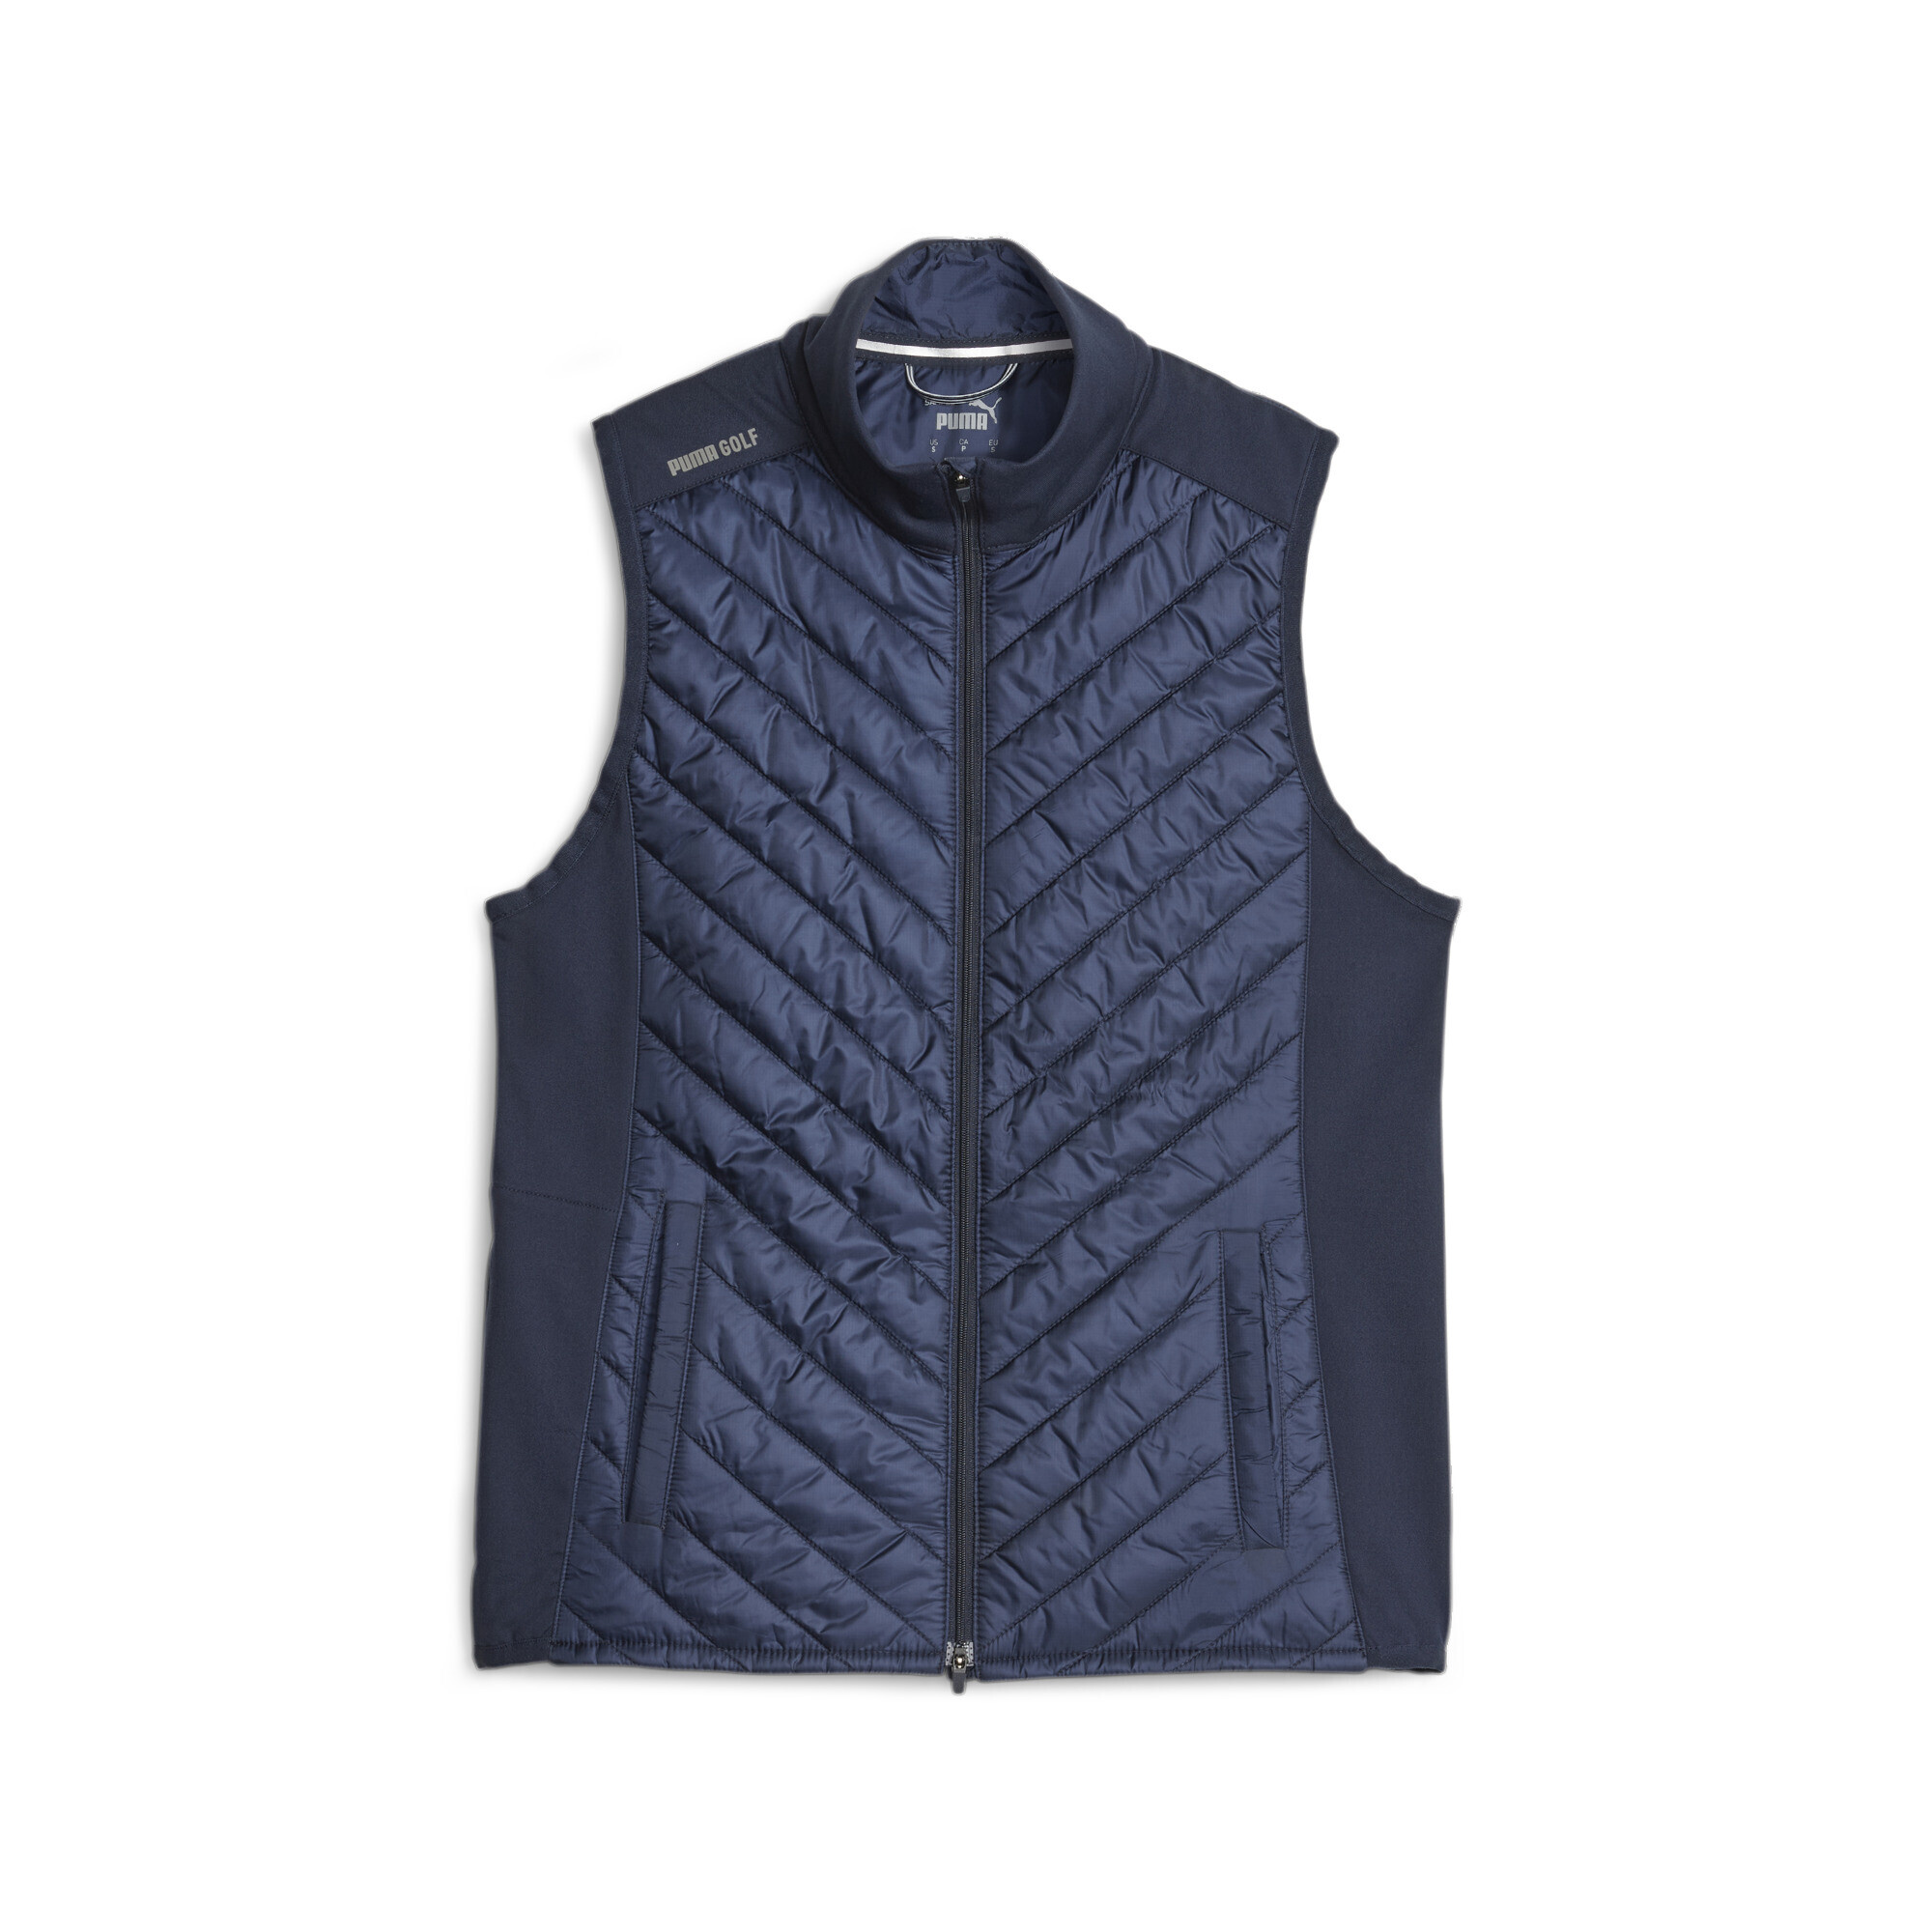 Gilet femme Puma Frost quilted